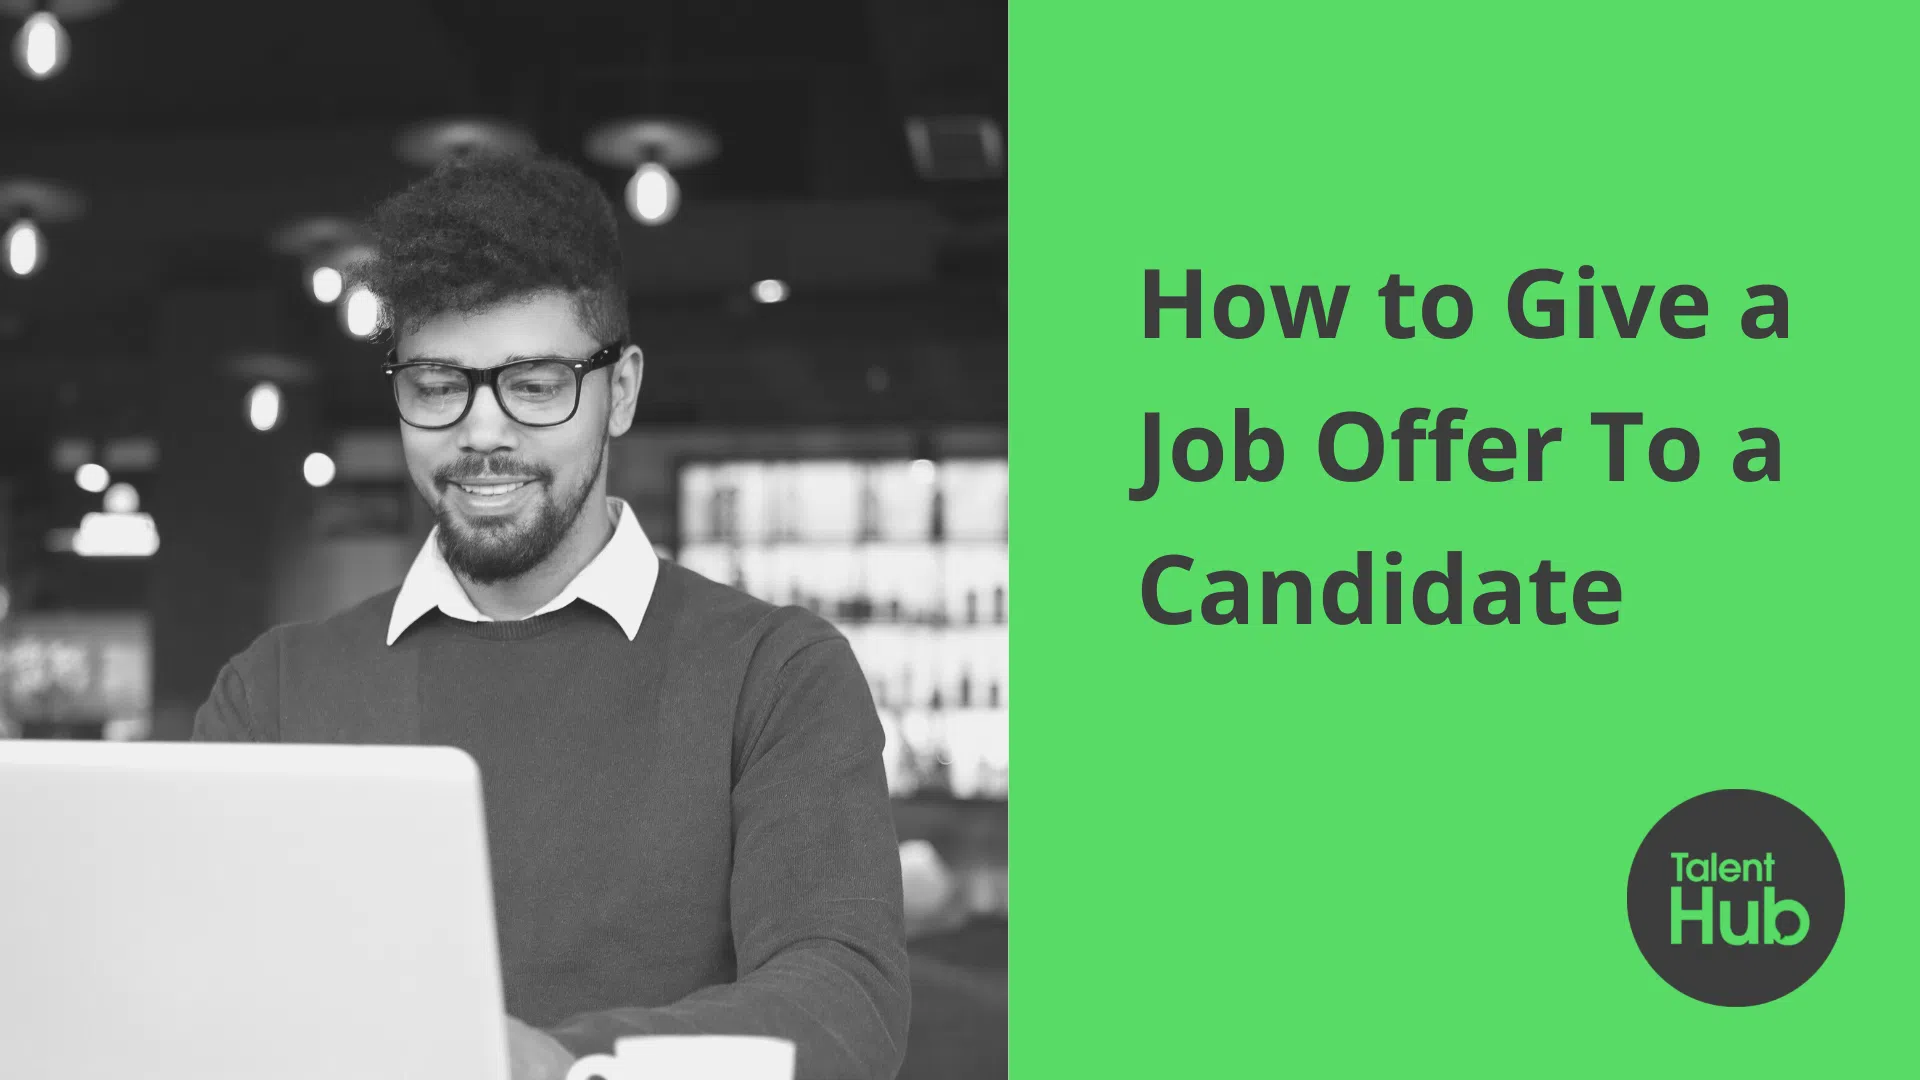 How to Give a Job Offer to a Candidate